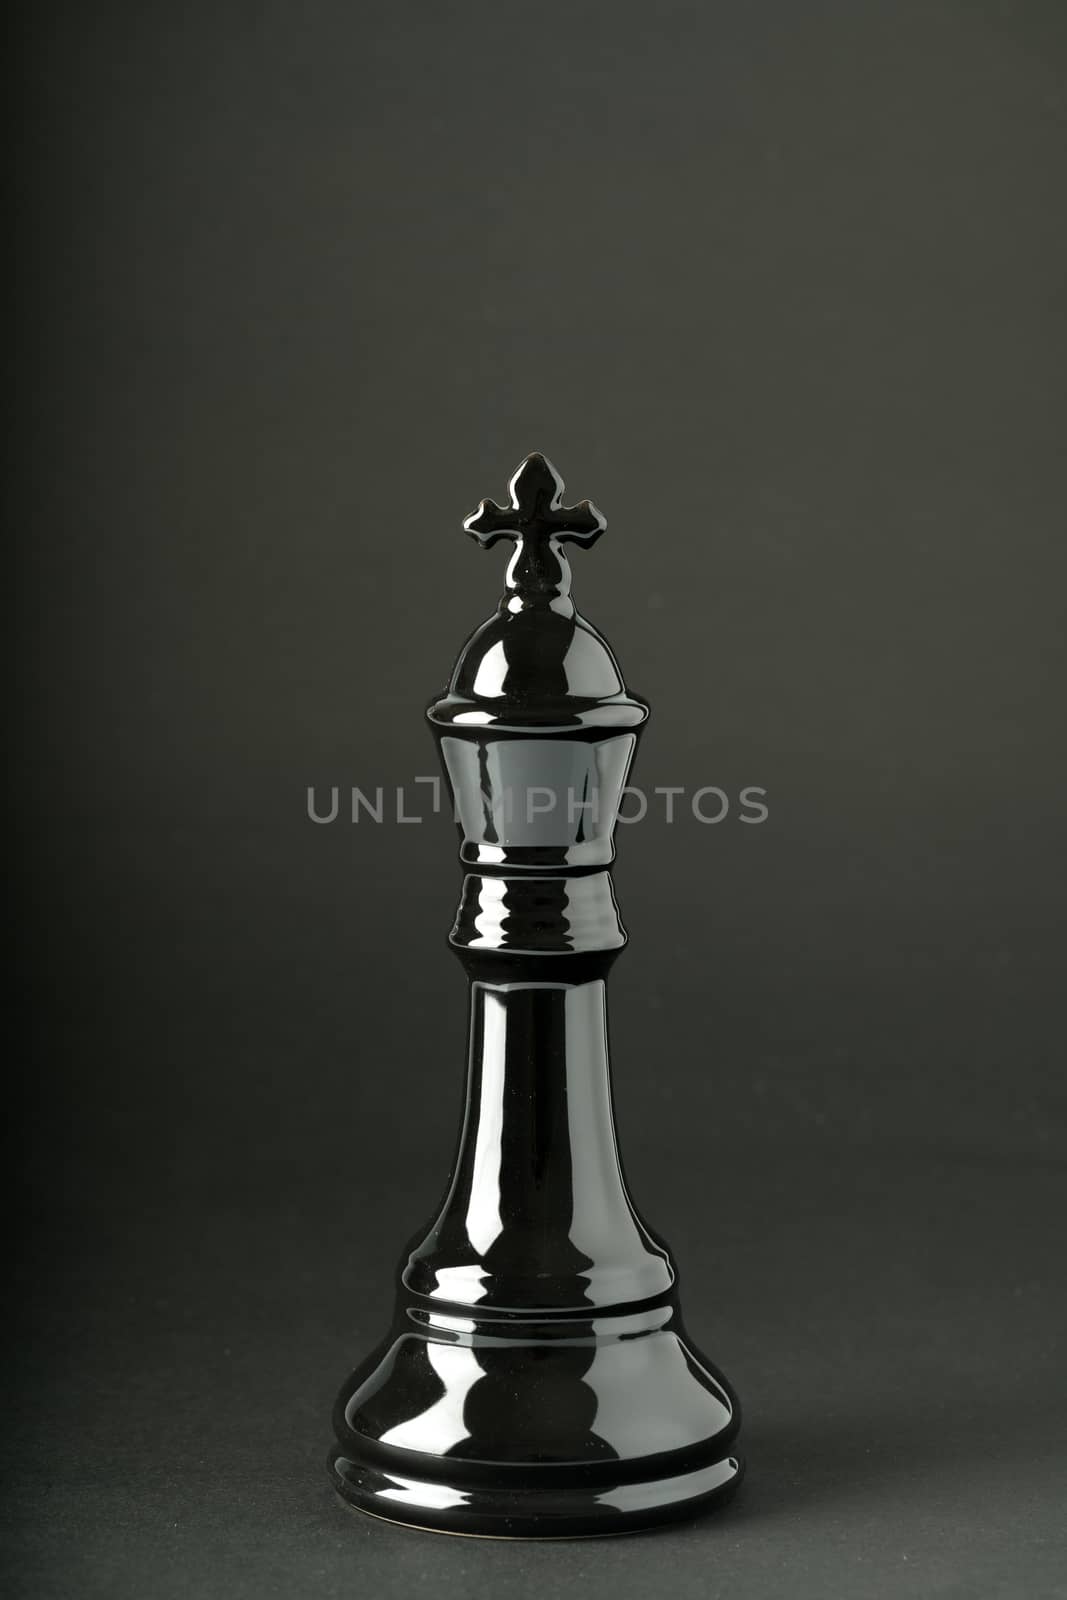 Chess business concept, leader teamwork & success by Alicephoto